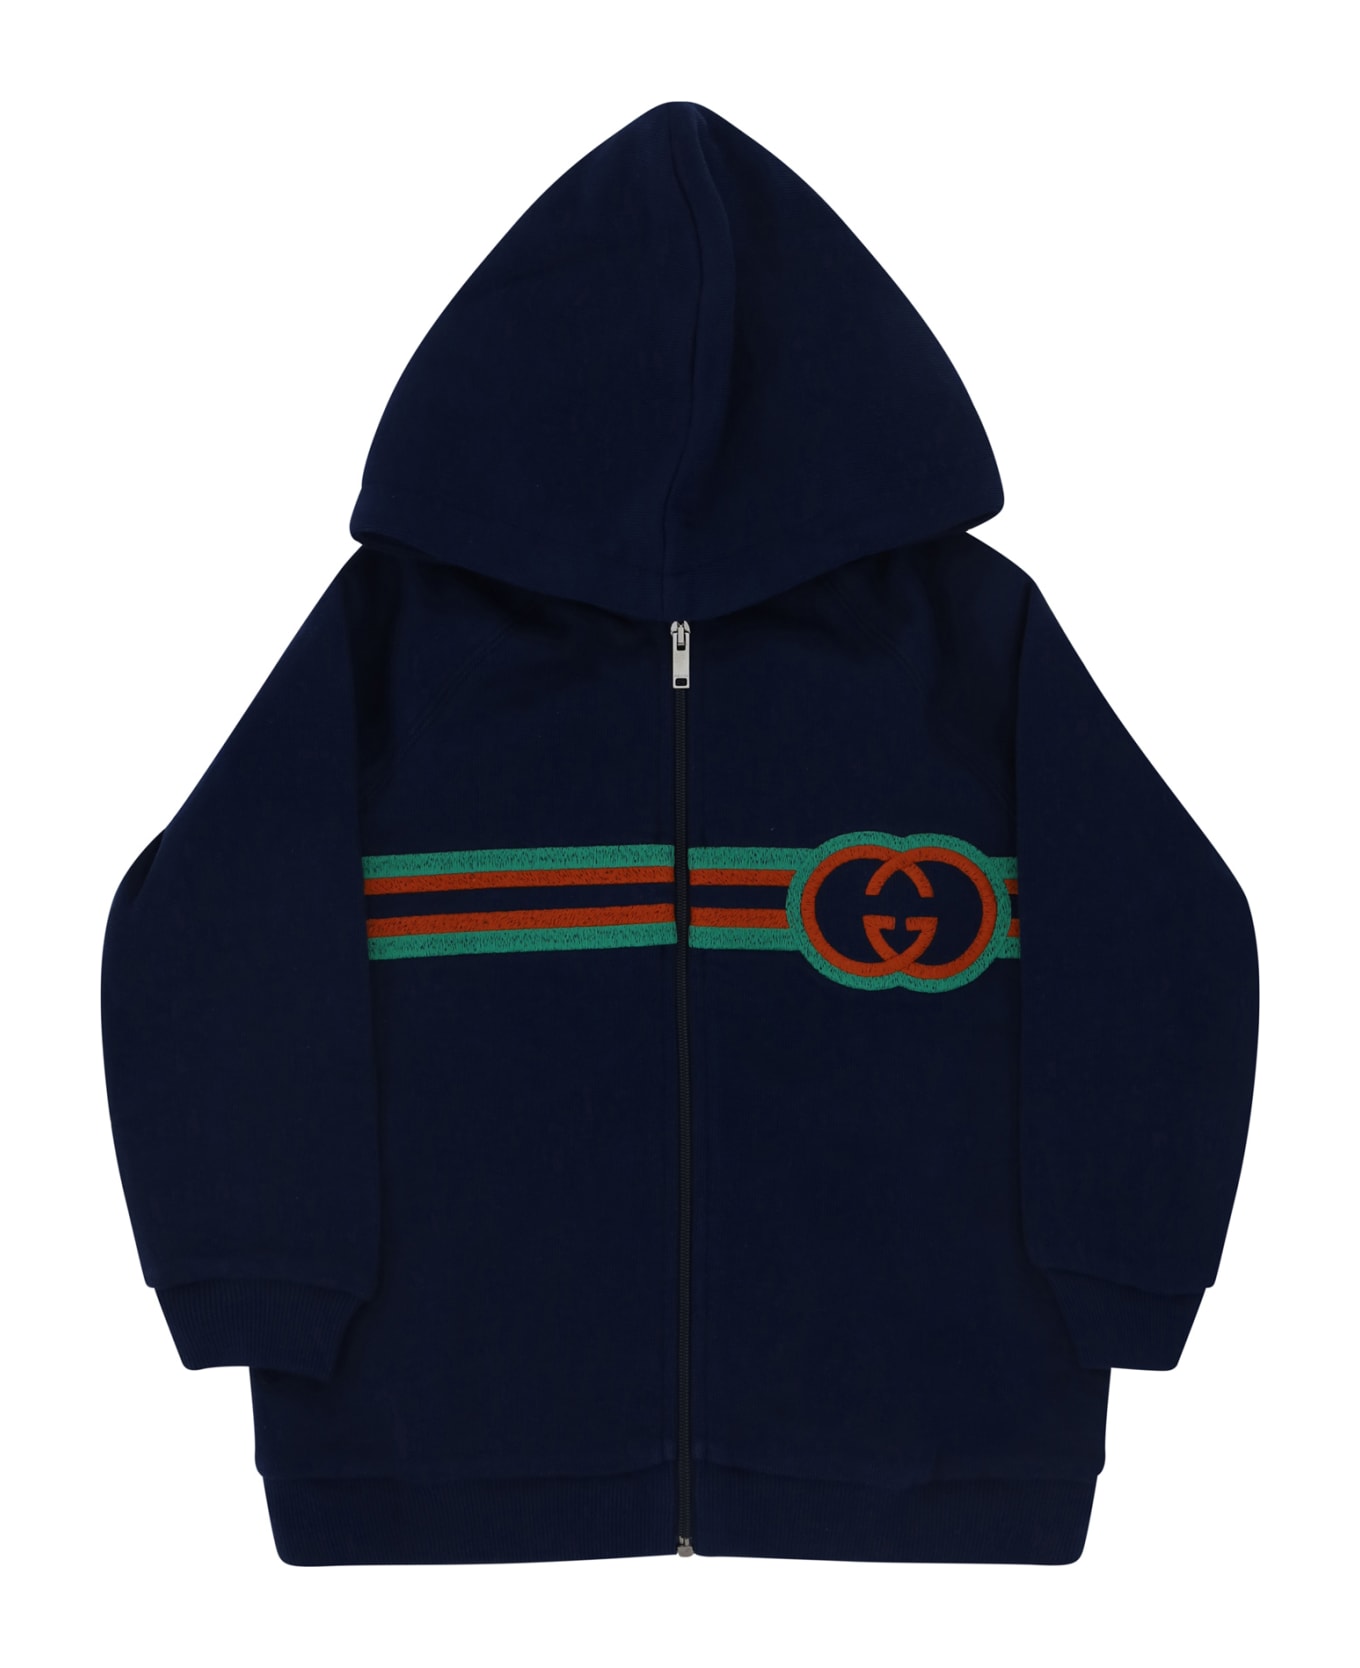 Gucci Hoodie For Boy - Prussian Blue